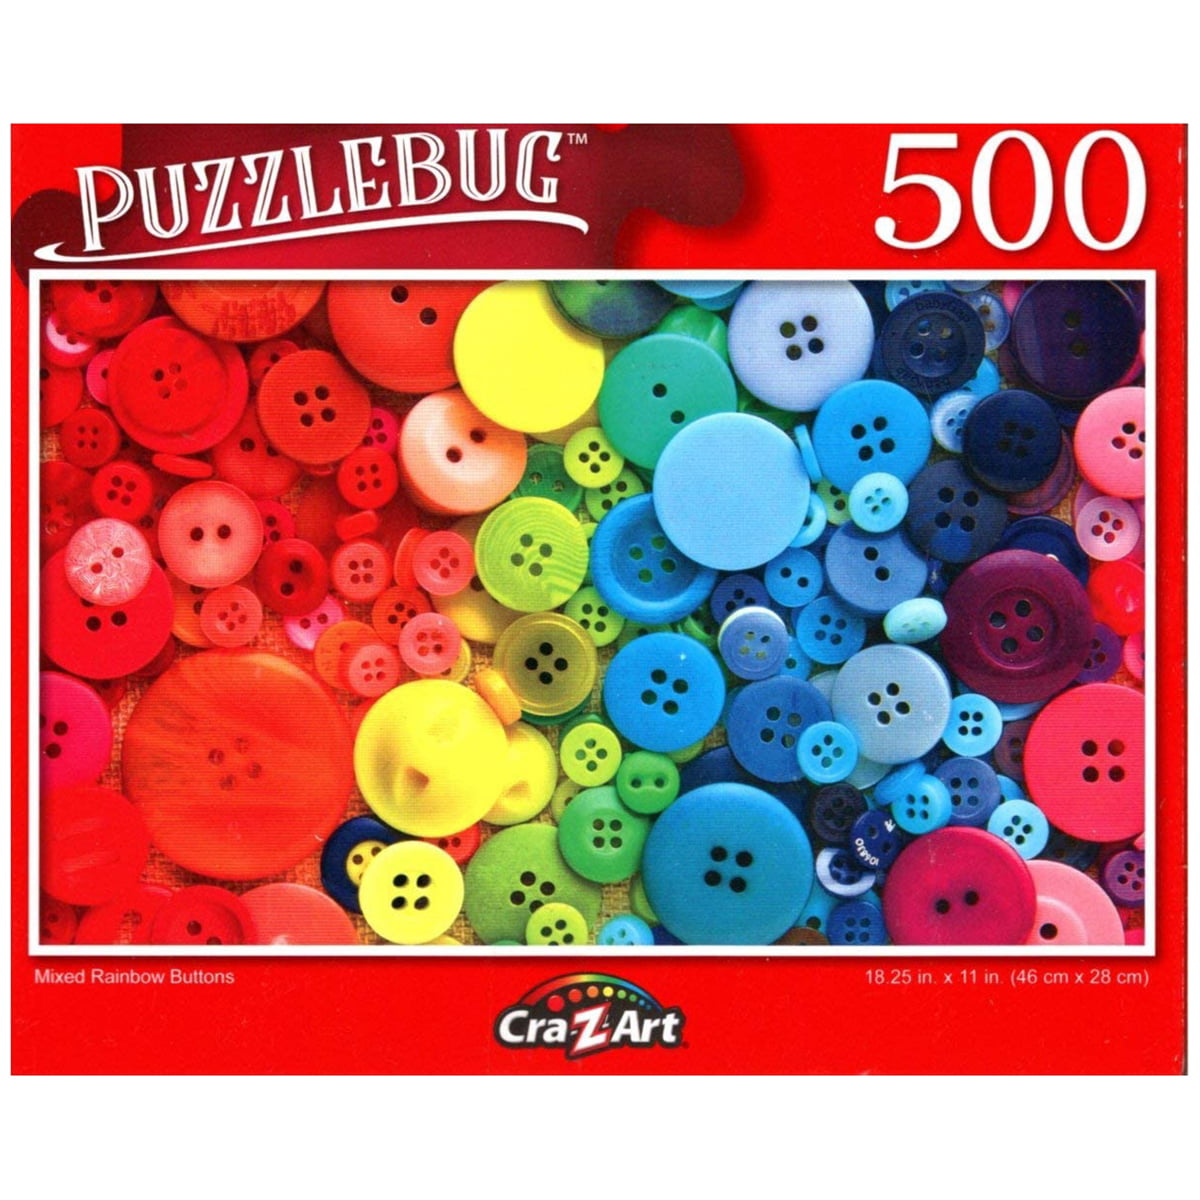 Puzzlebug Colorful Button Drawer Puzzle 500 Piece for sale online 